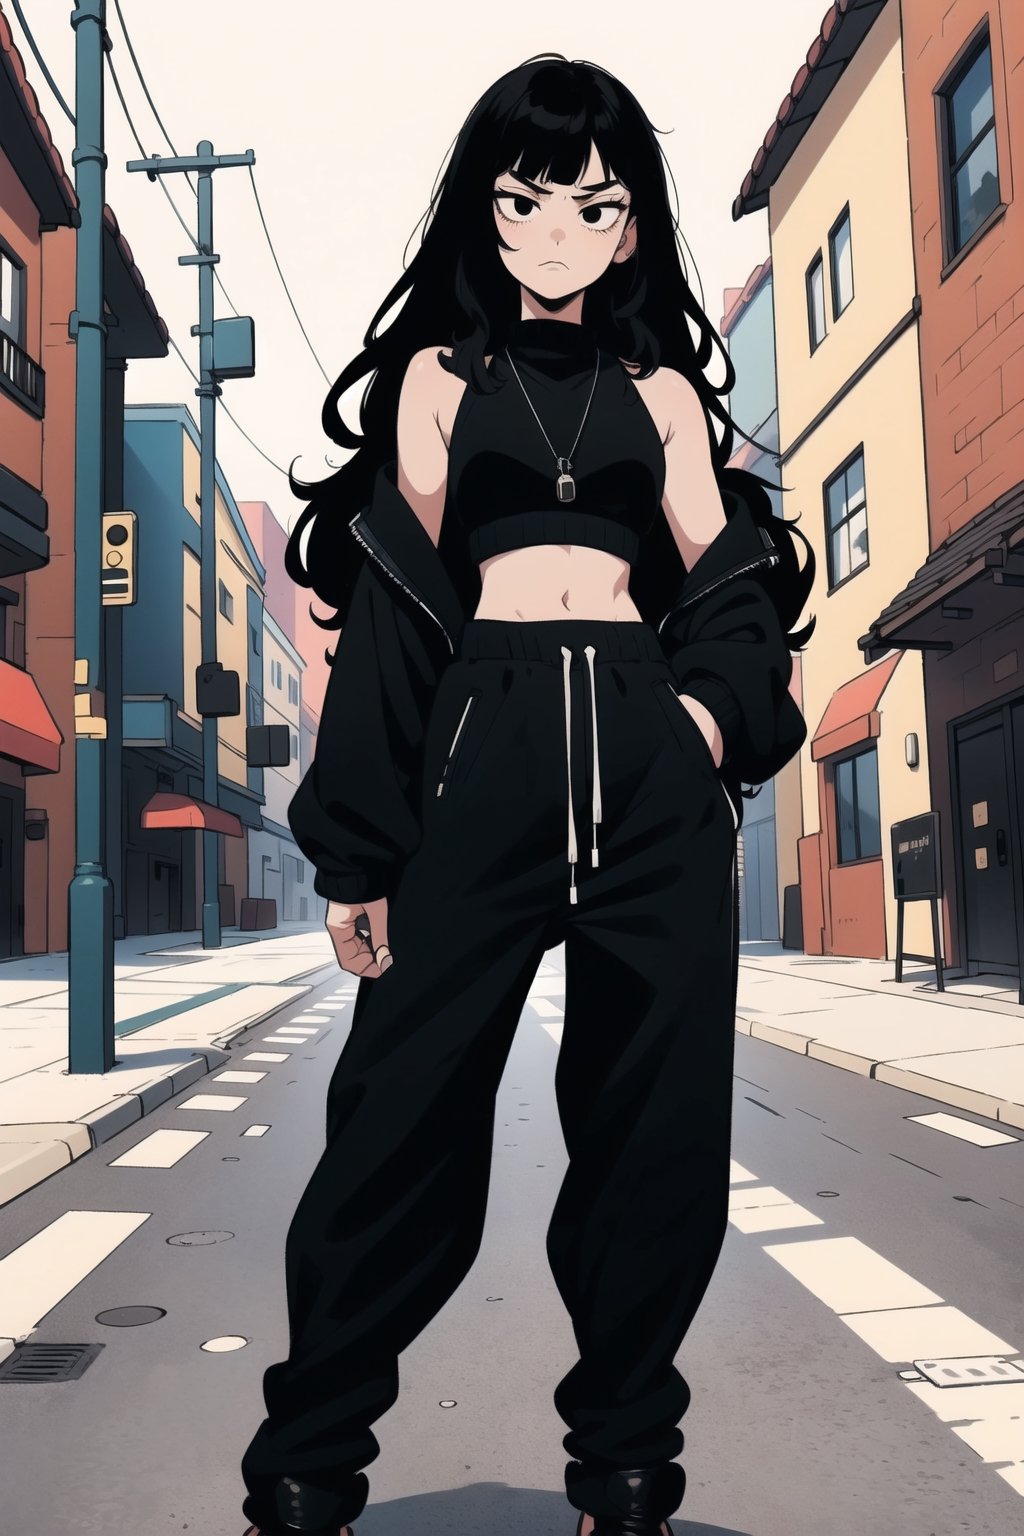 1 girl (25 years old), dark black hair (curly hair, long hair), (best quality), (black eyes), thin body, slim body, serious face, 
leather jacket, black top, black baggy joggers (wool joggers, baggy pants) , black leather boots,
Standing in the street,niji